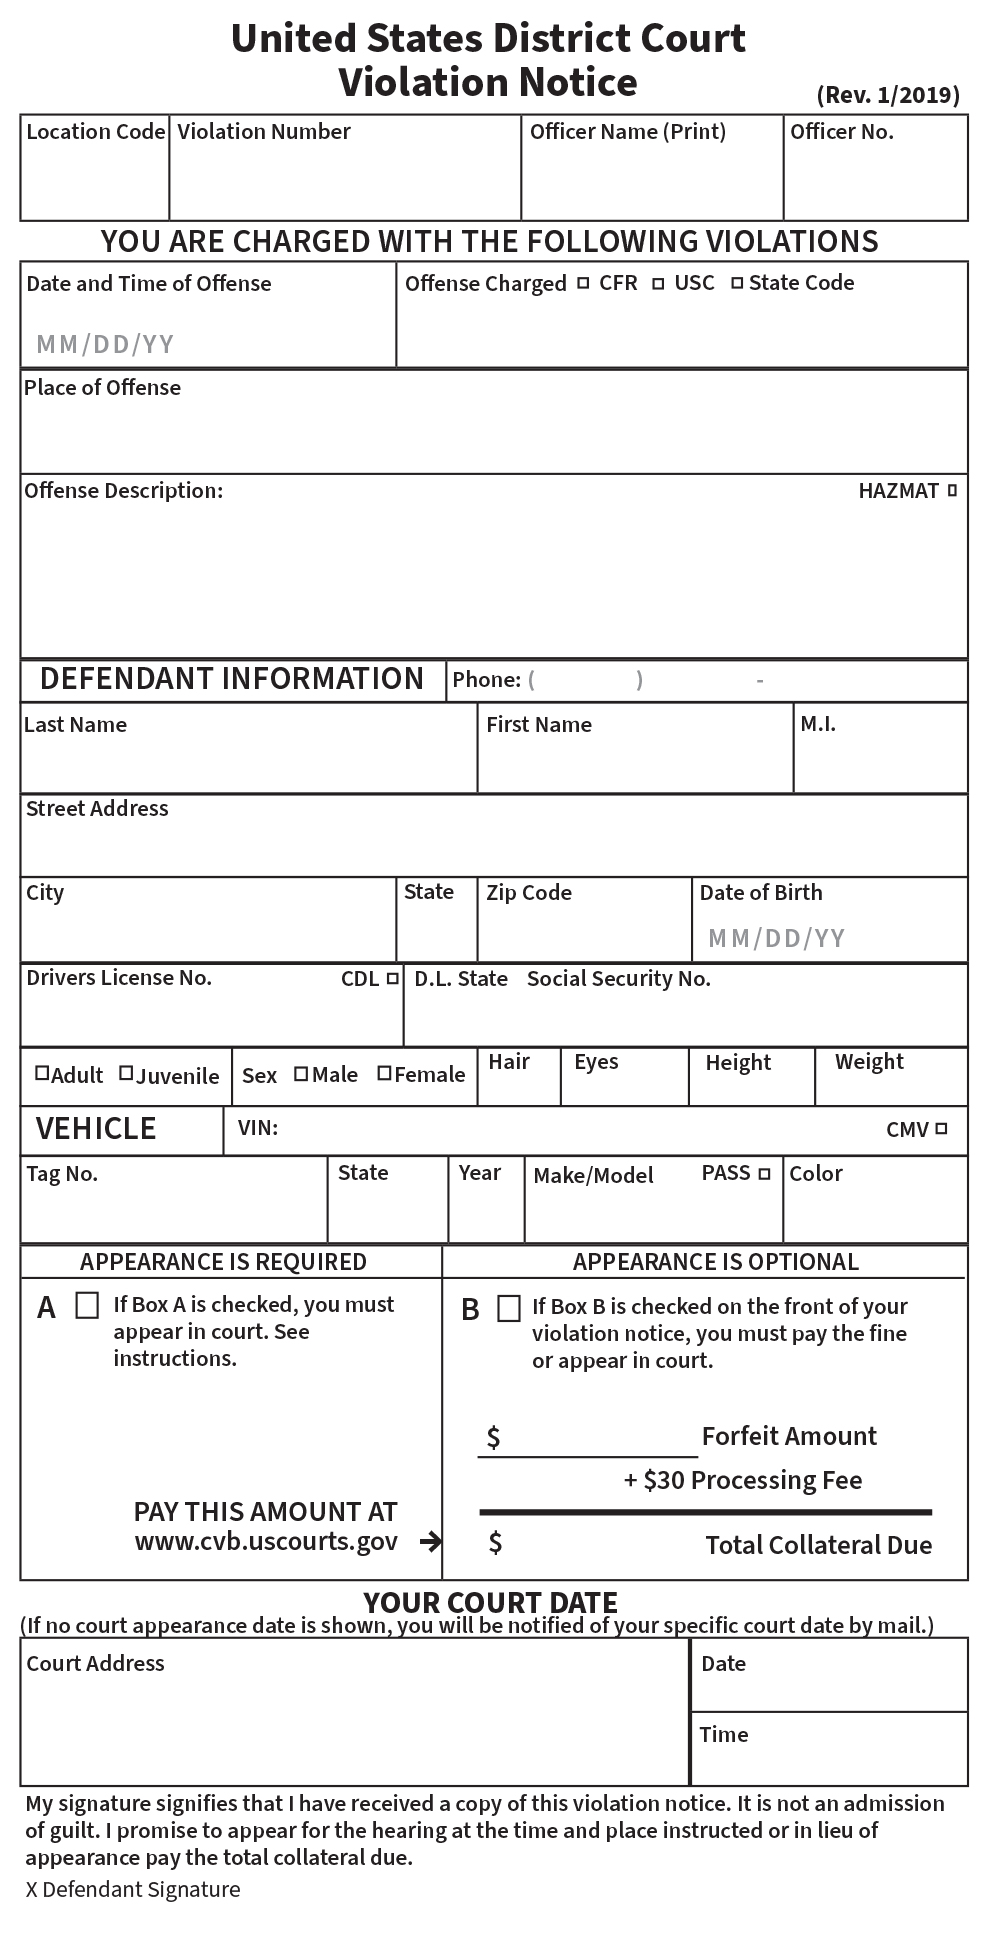 Sample image of the front of a CVB Violation Notice